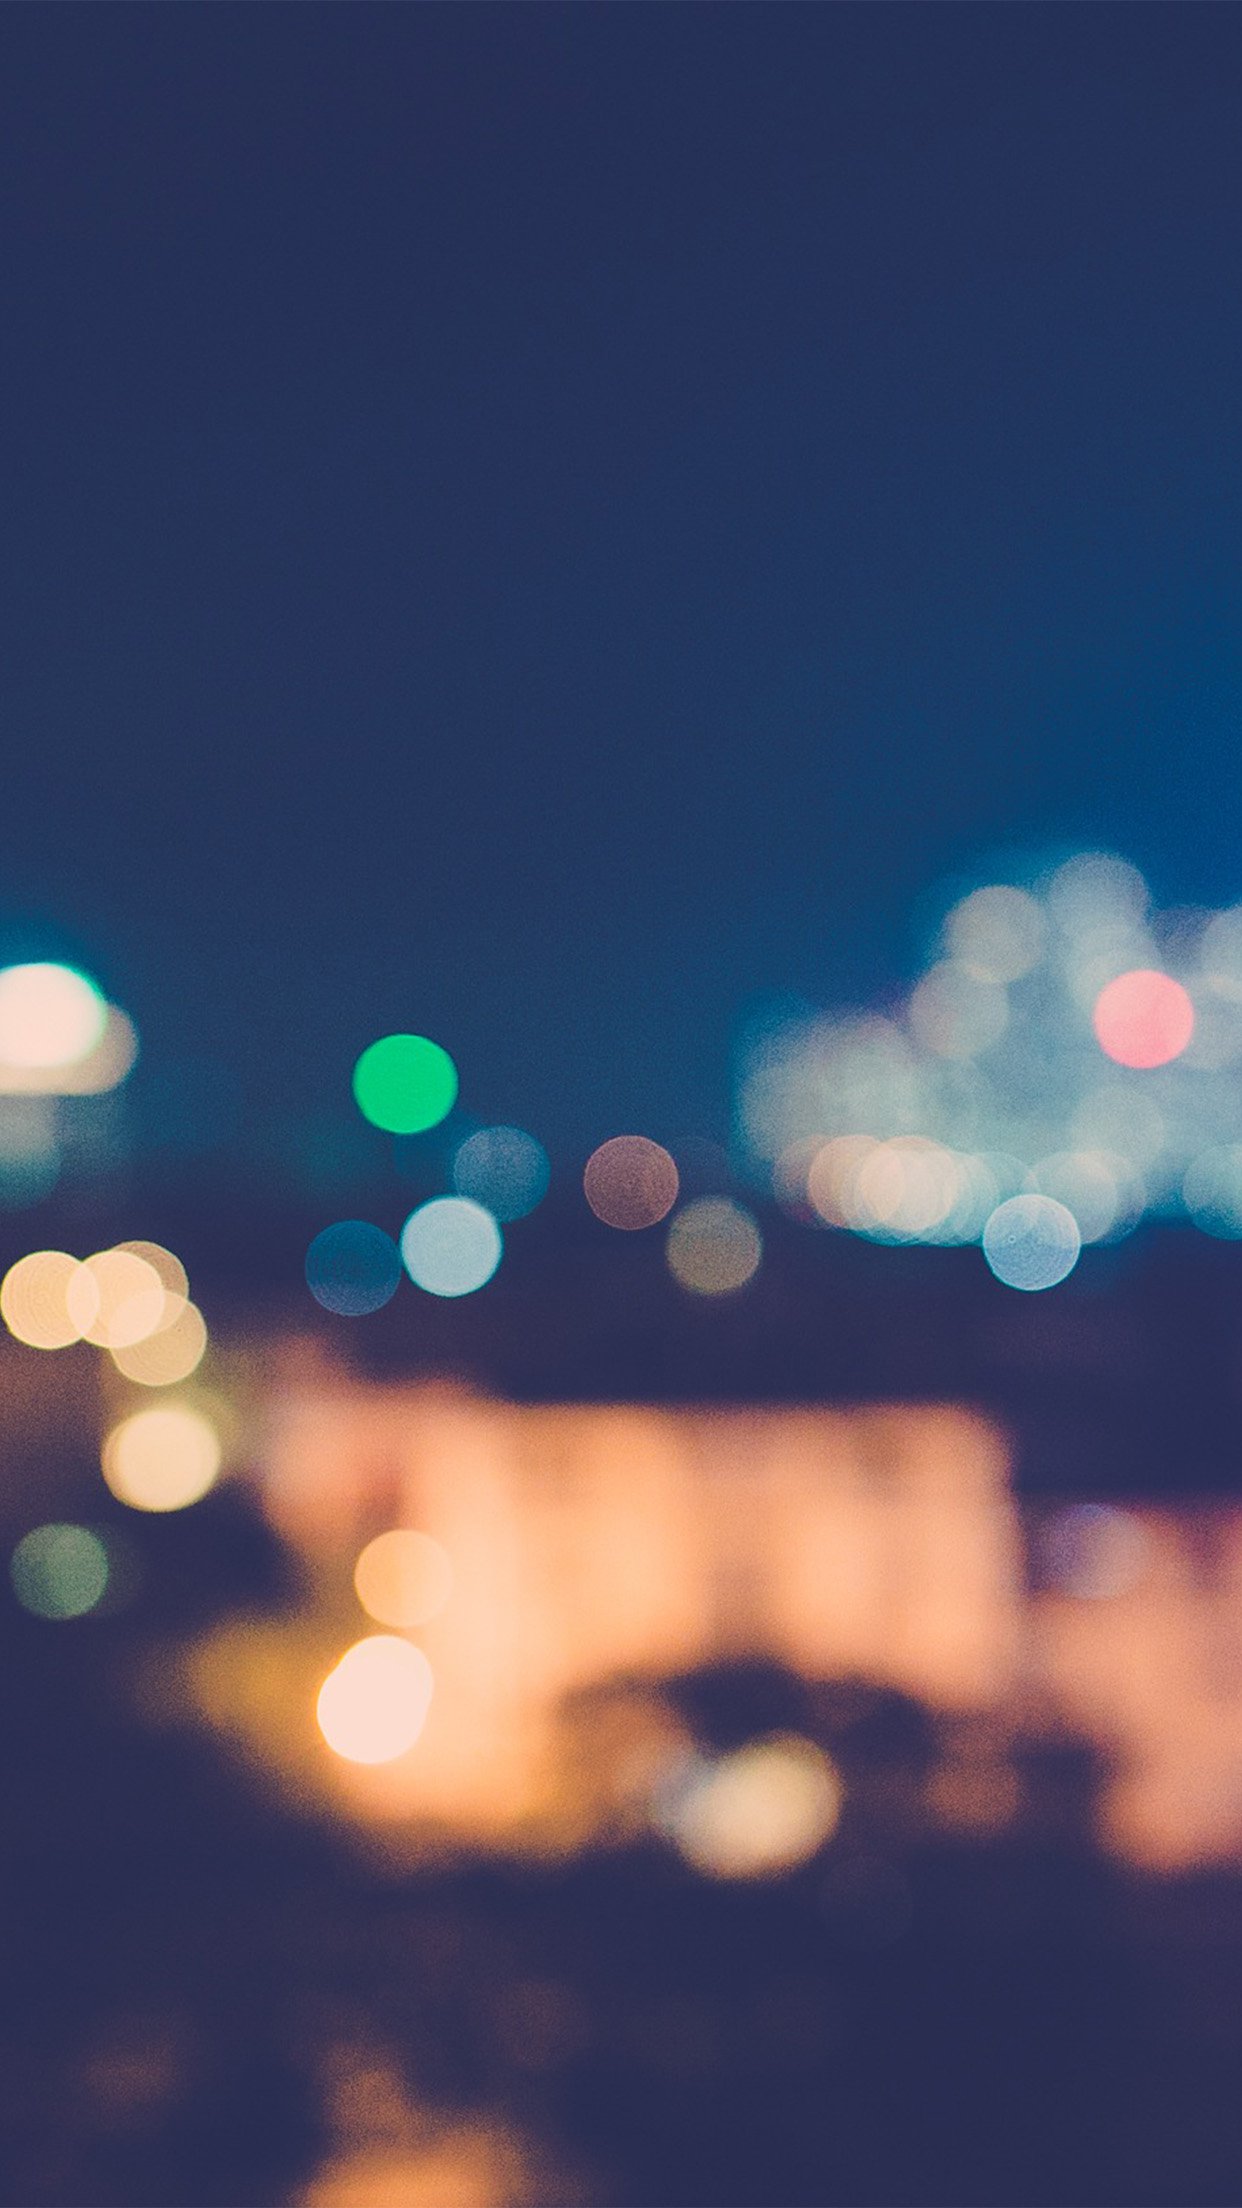 City Night Bokeh Blue Romantic Android wallpaper - Android ...